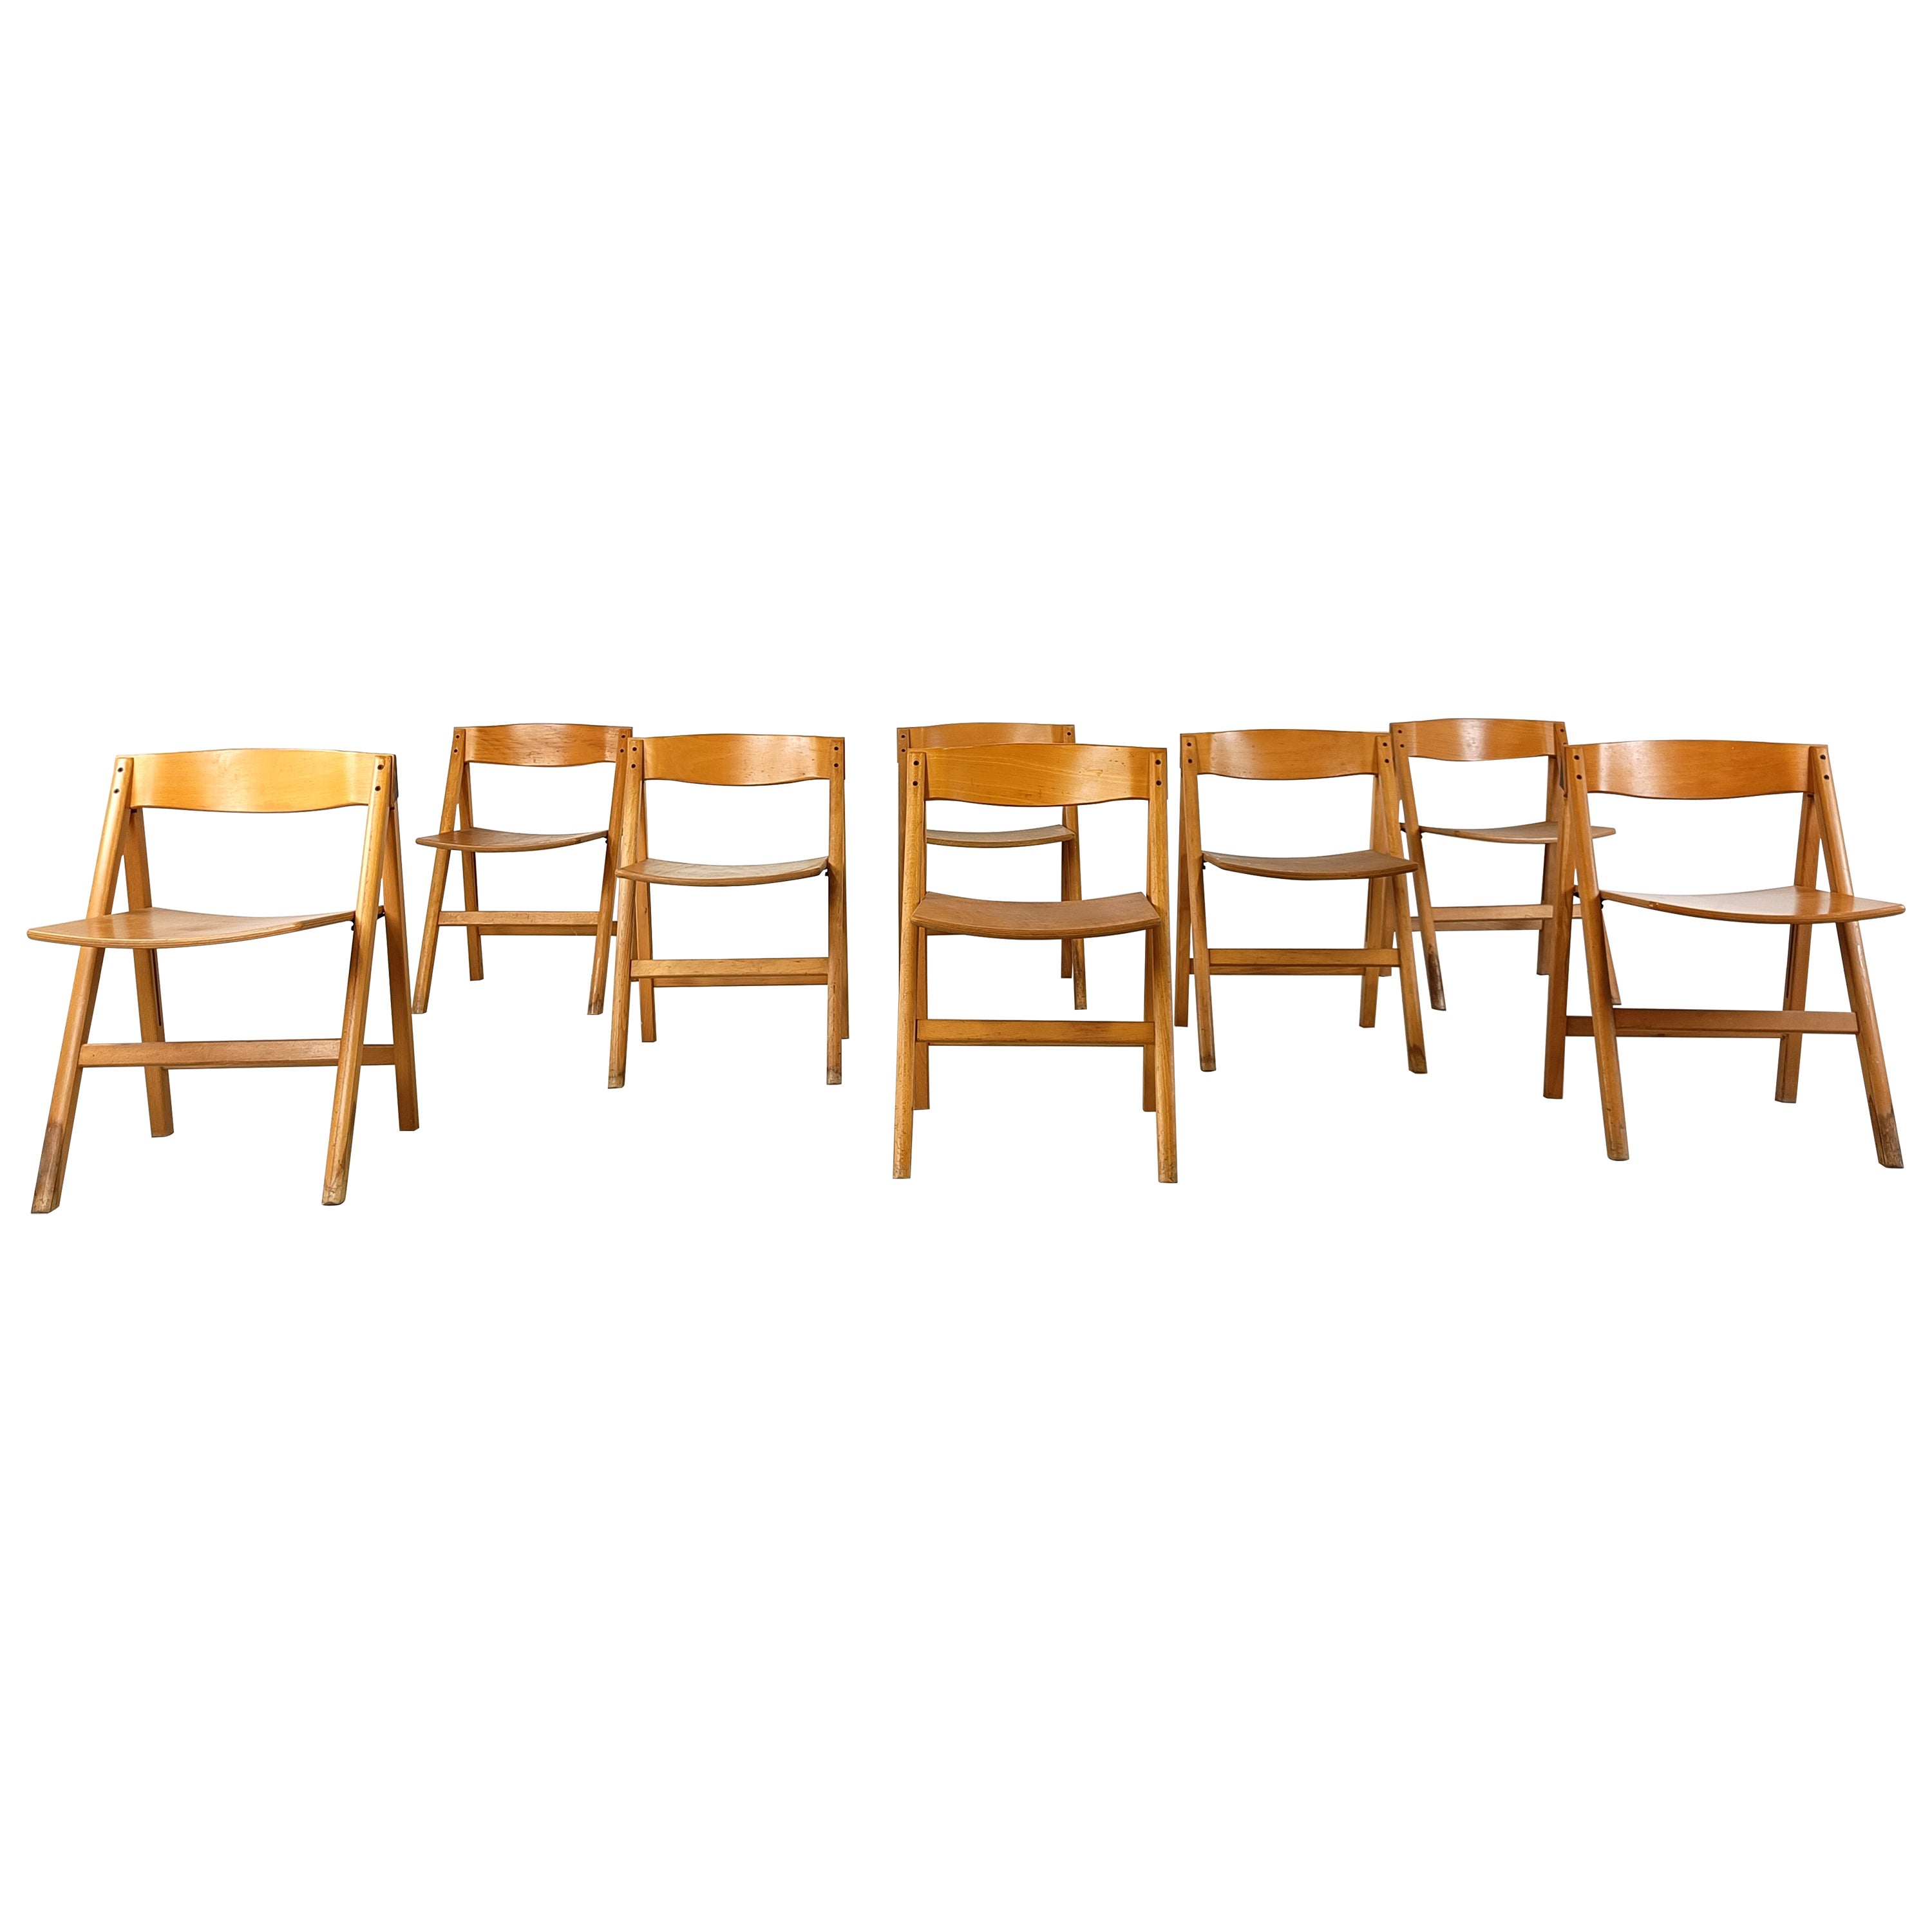 Vintage scandinavian folding chairs by Hyllinge Mobler, 1970s - set of 8 For Sale